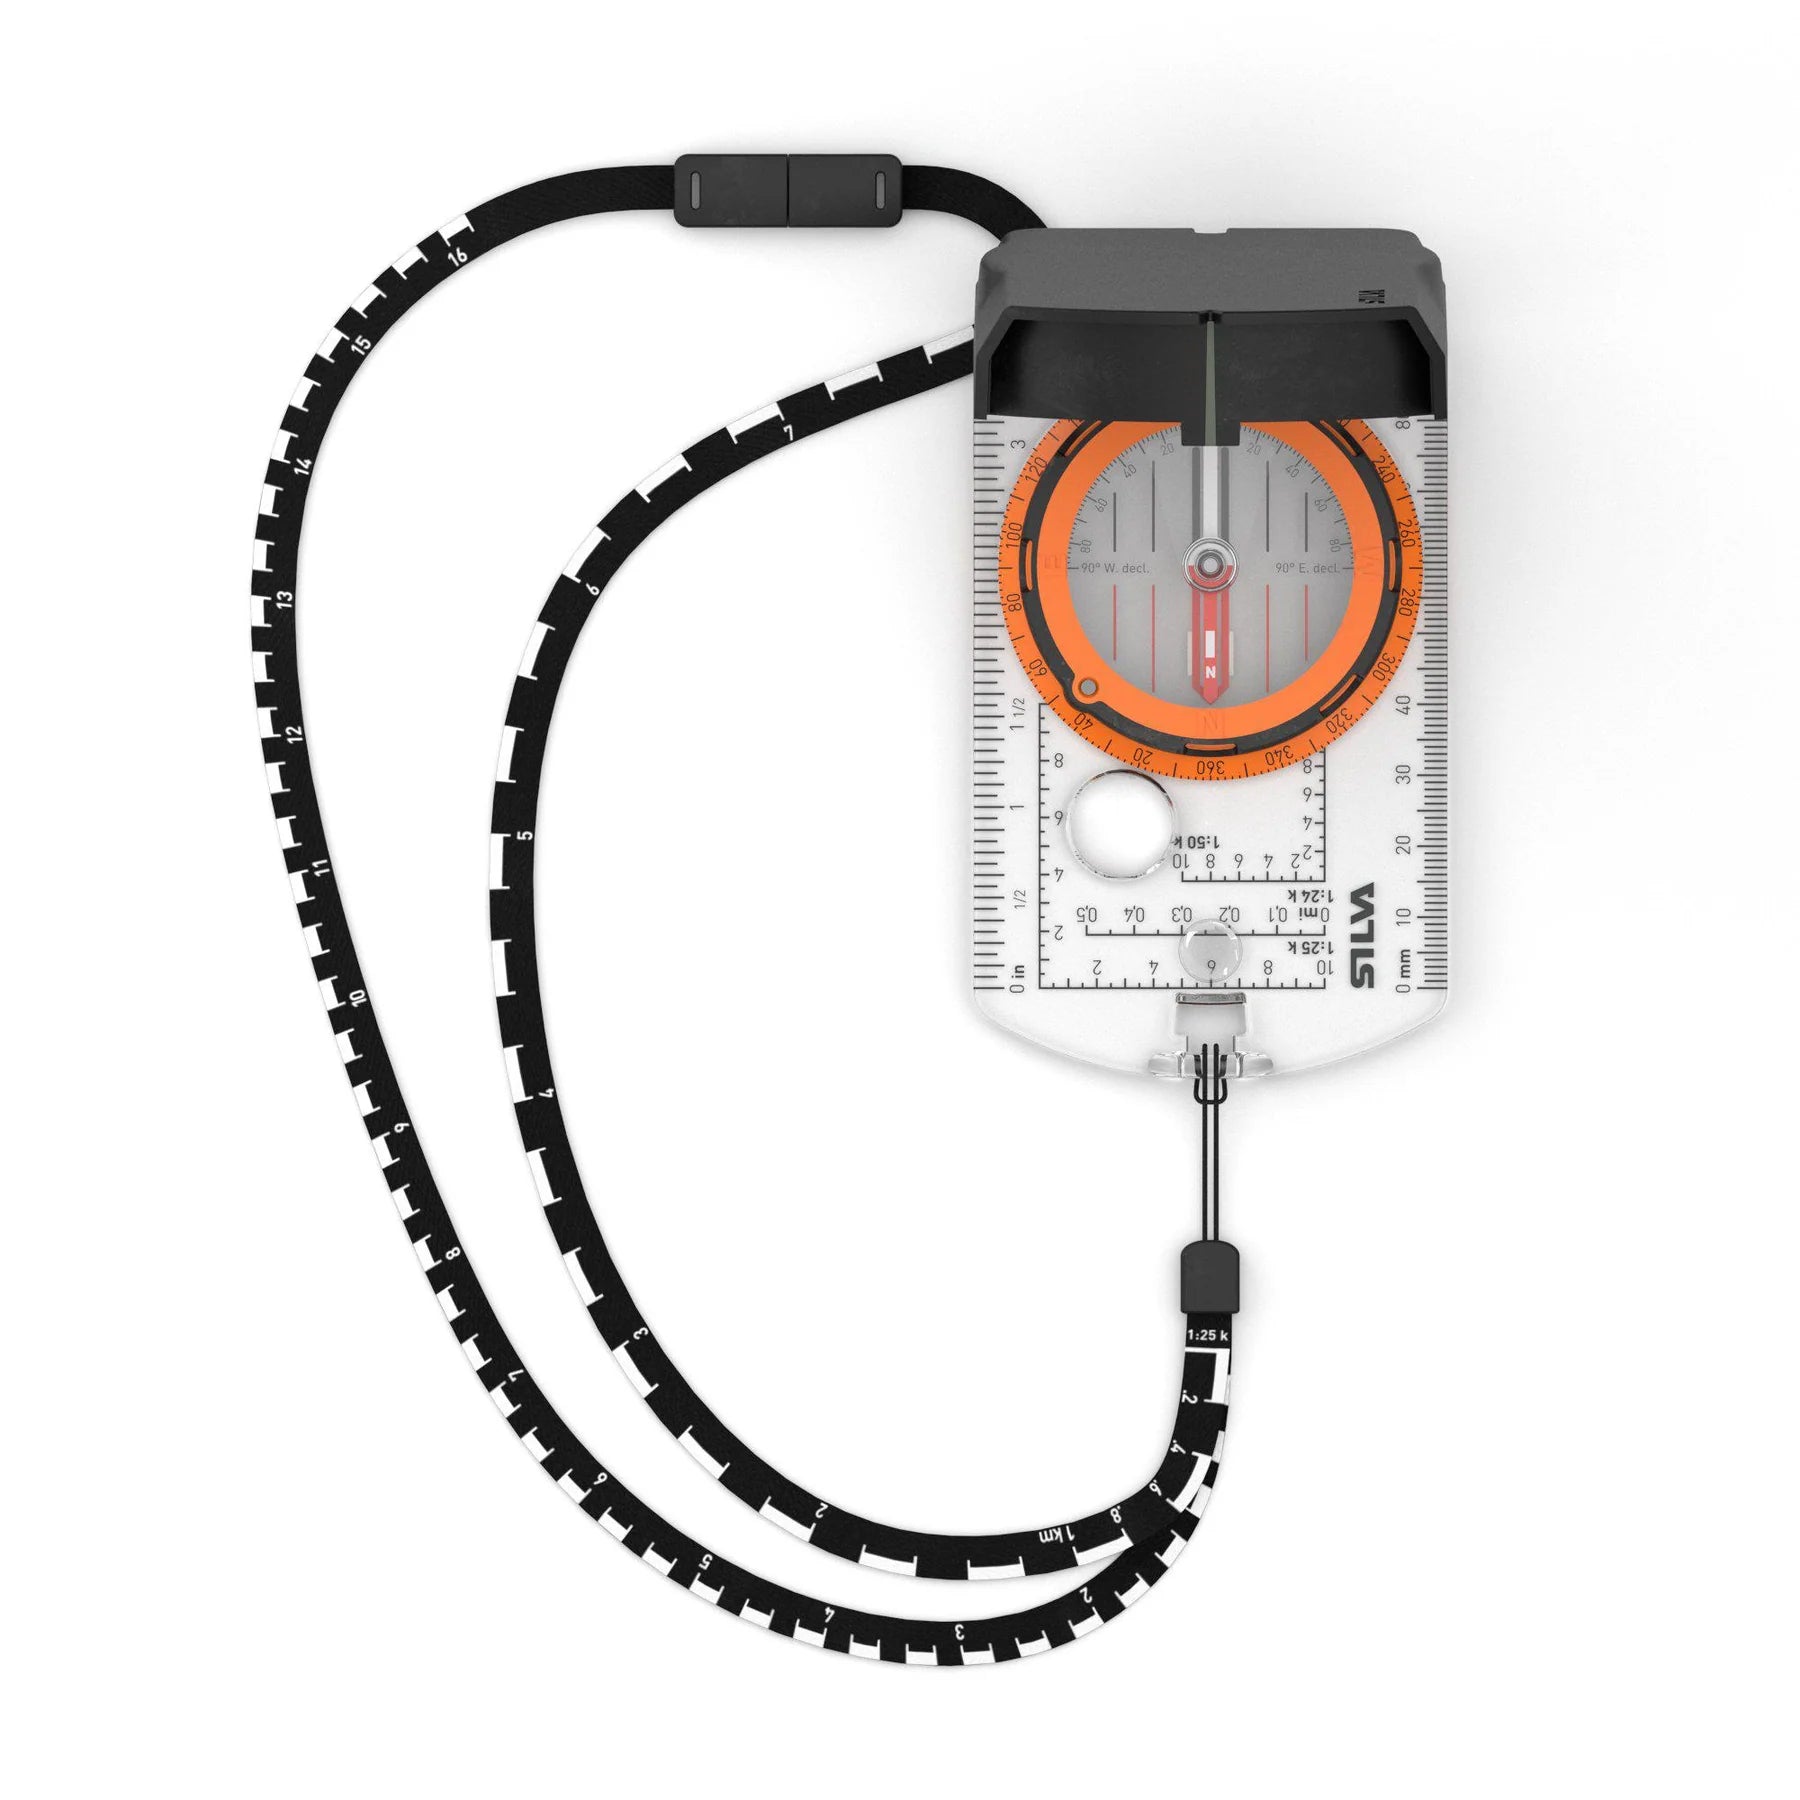 Silva Expedition S Compass